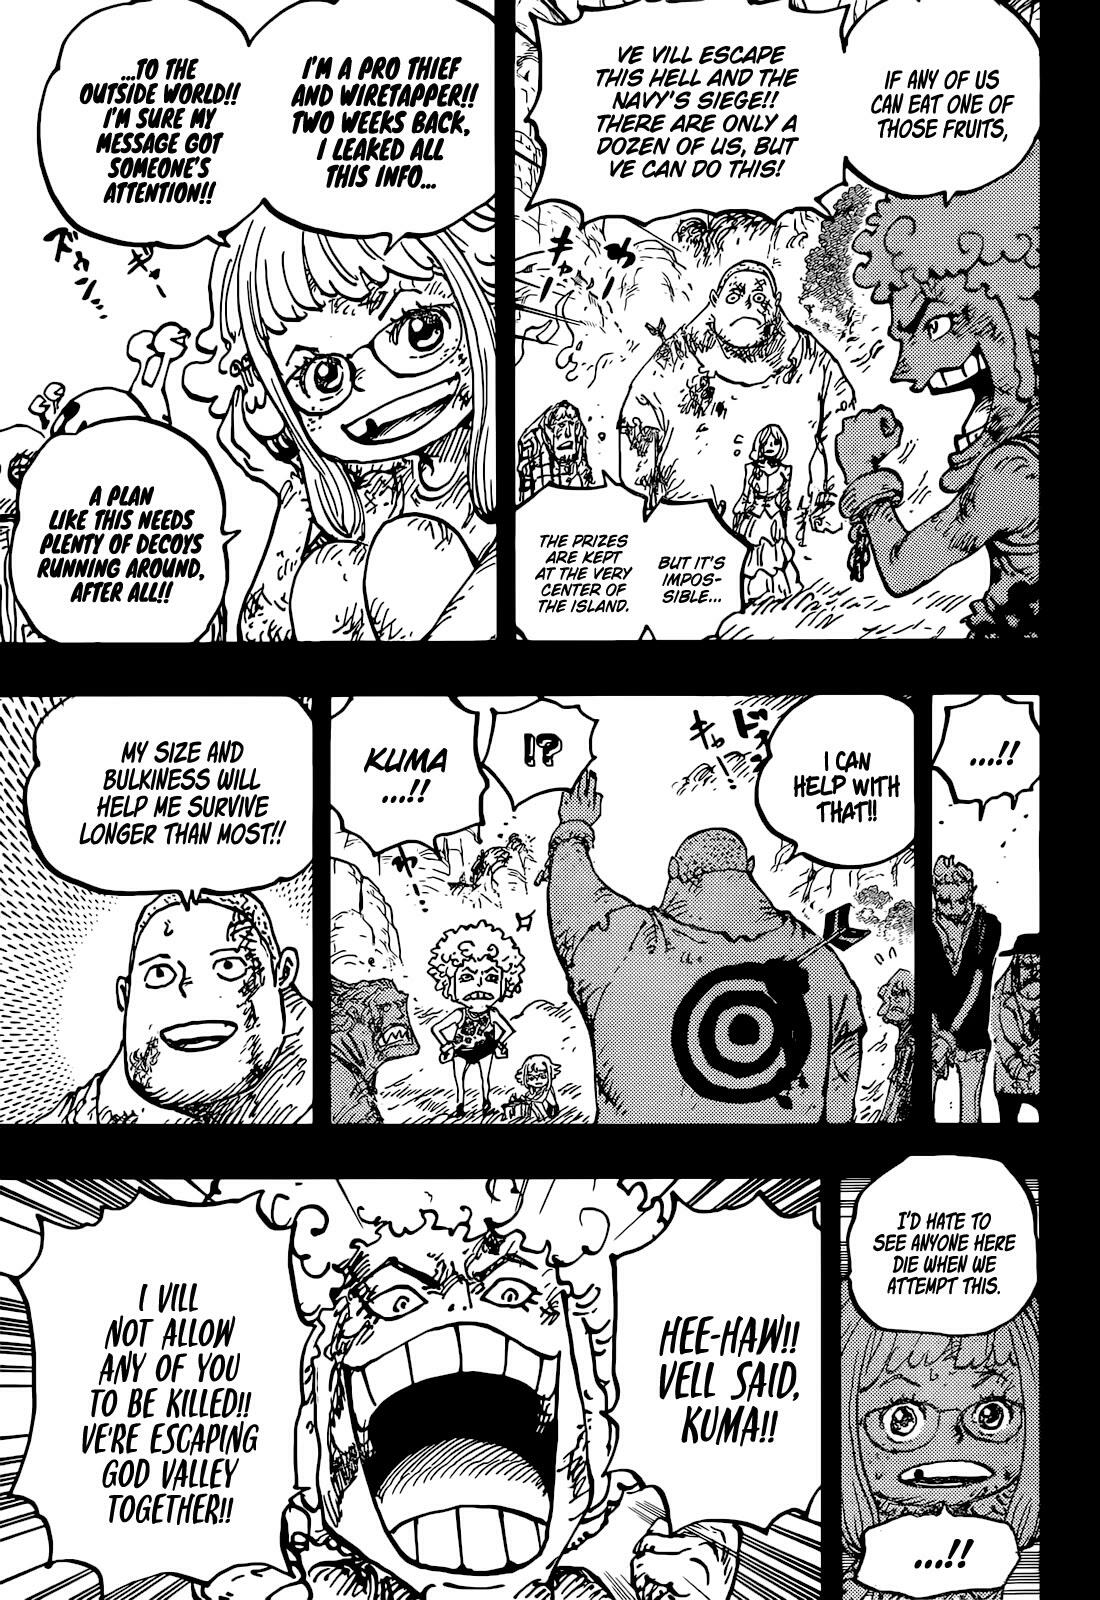 One Piece Chapter 1061 Leaks Reveal Possible First Look at Vegapunk,  Spoilers